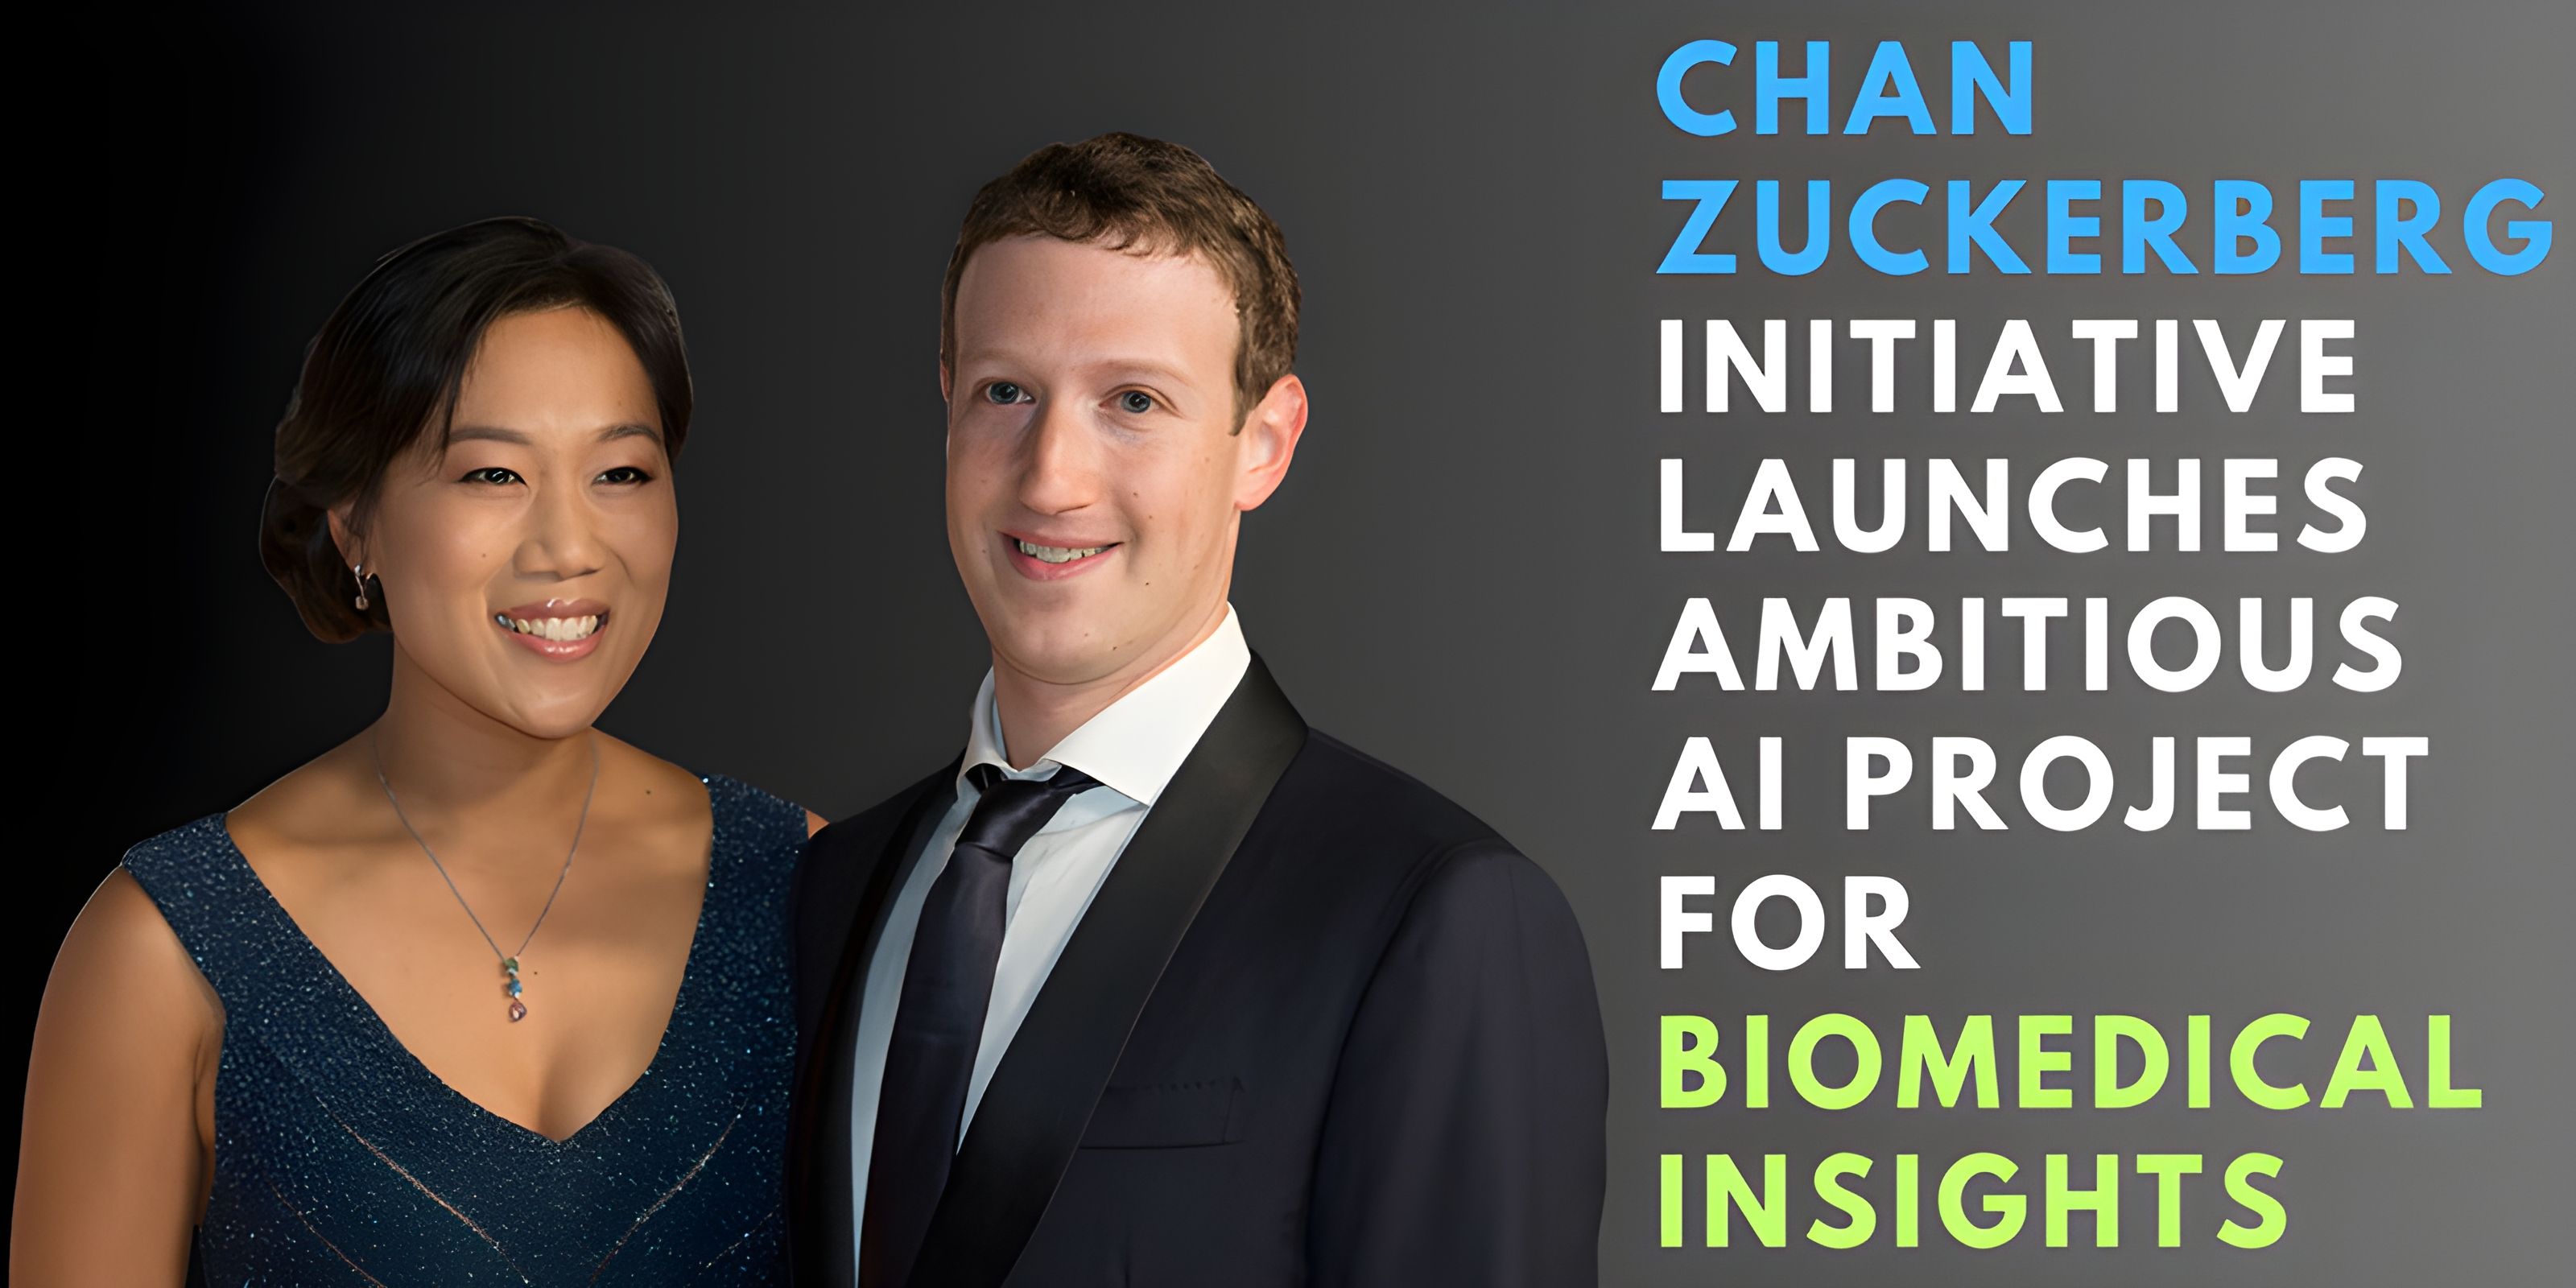 The Chan Zuckerberg Initiative Launches Ambitious AI Project for Biomedical Insights